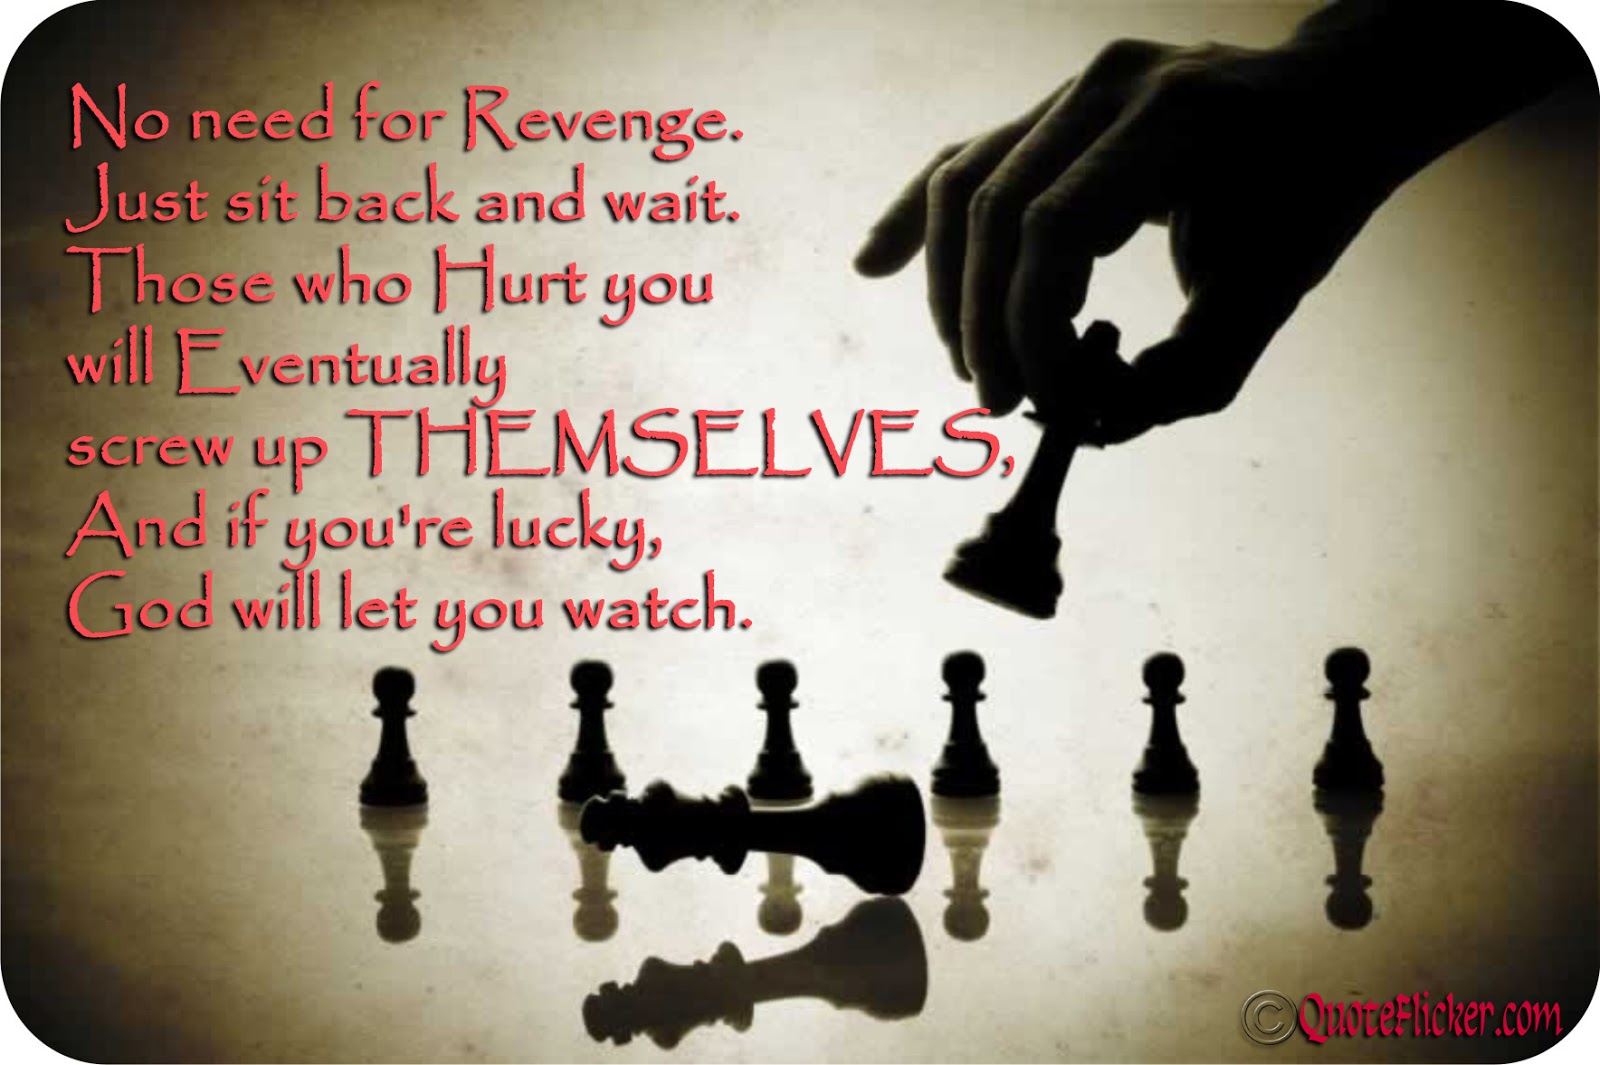 No-need-for-revenge.-Just-sit-back-and-wait.-Those-who-hurt-you-will-eventually-screw-up-themselves-and-if-youre-lucky-God-will-let-you-watch..jpg